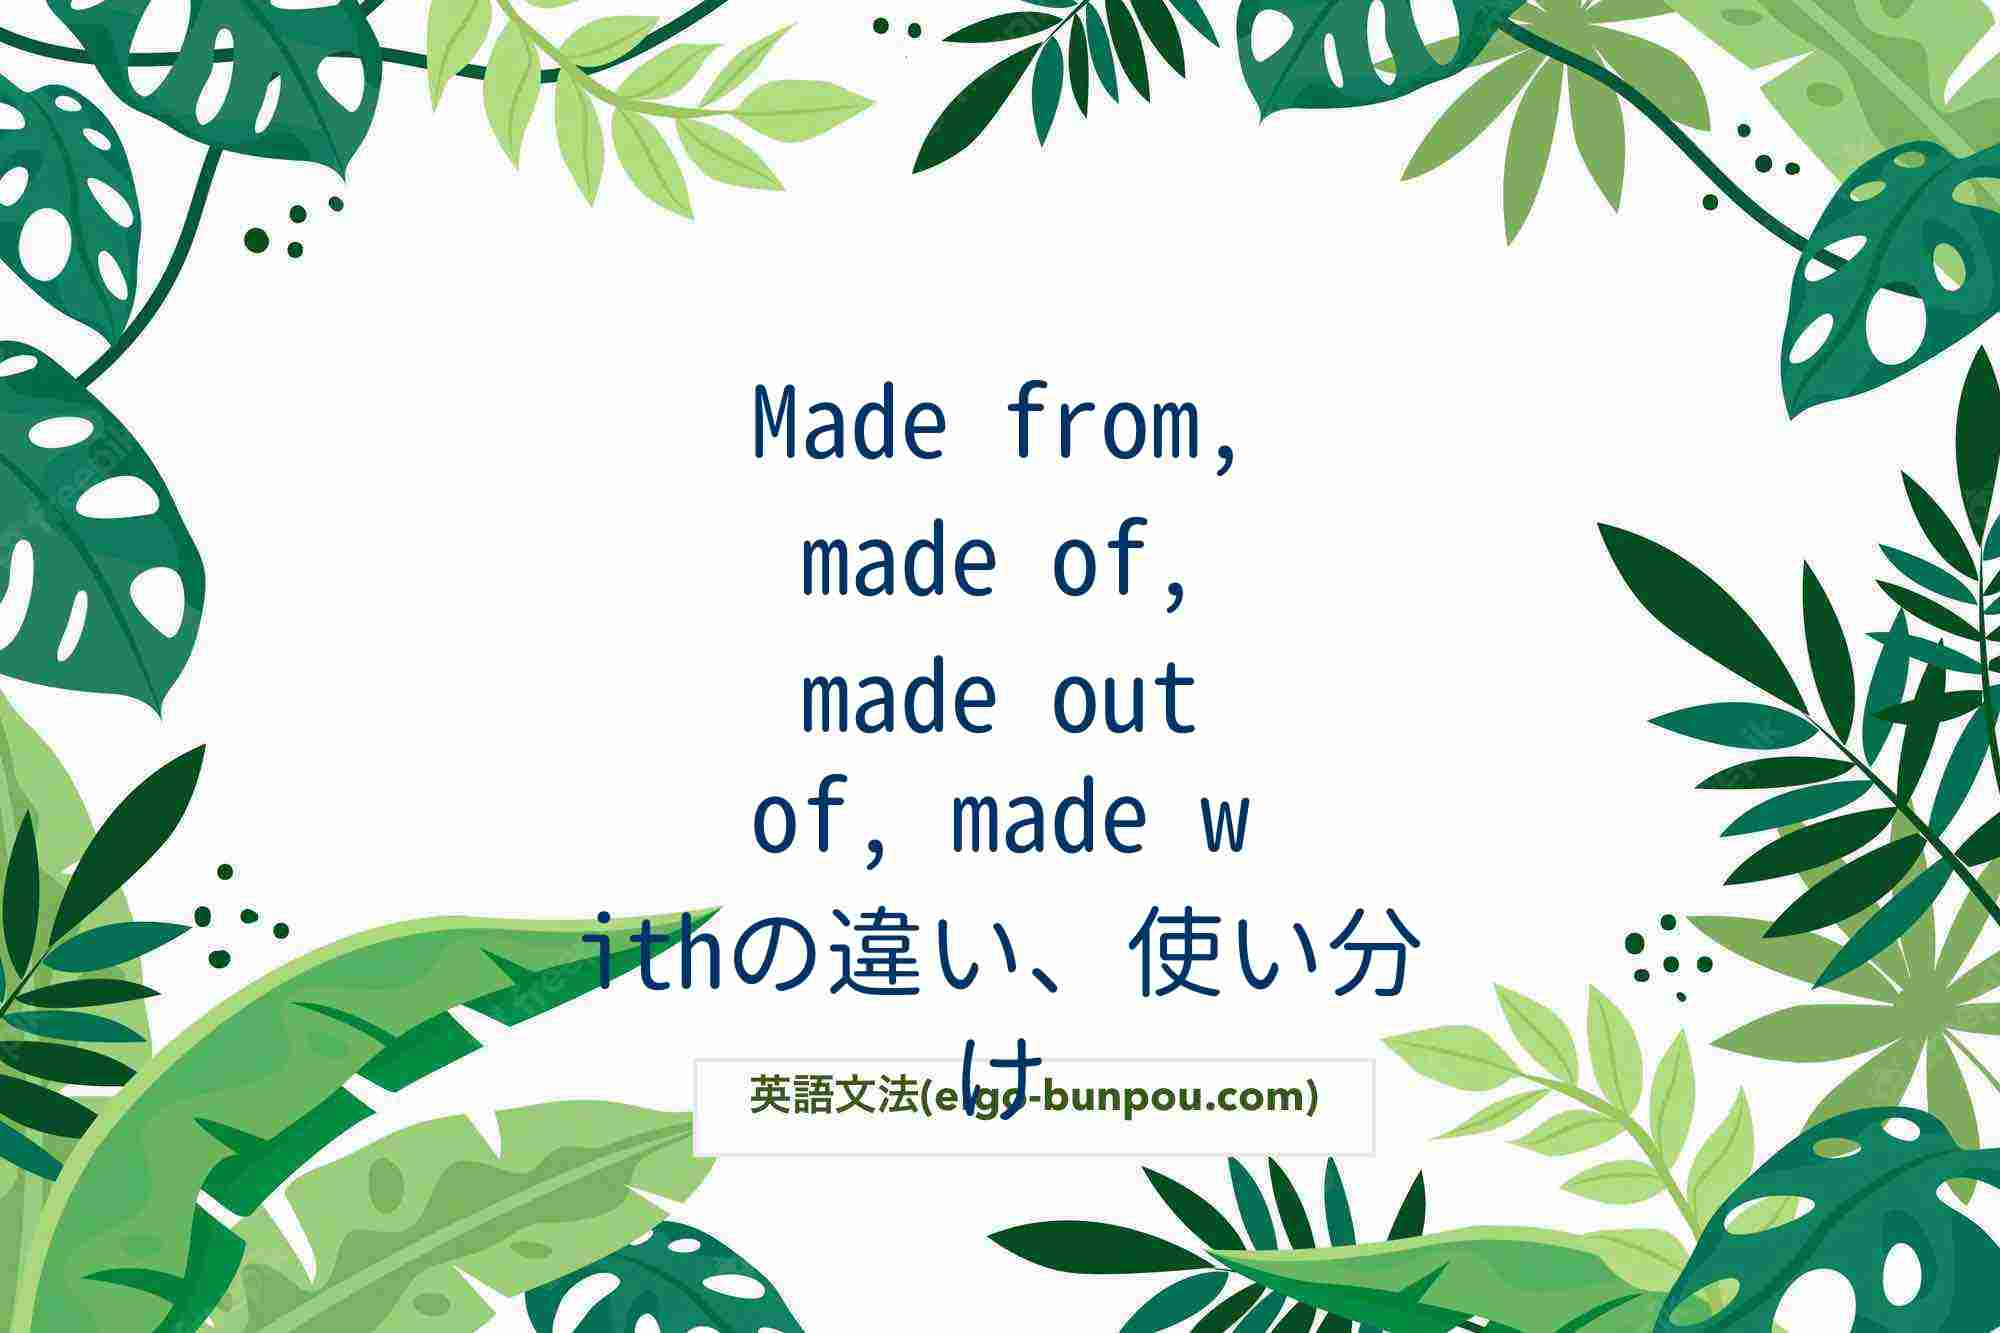 Made from, made of, made out of, made withの違い、使い分け